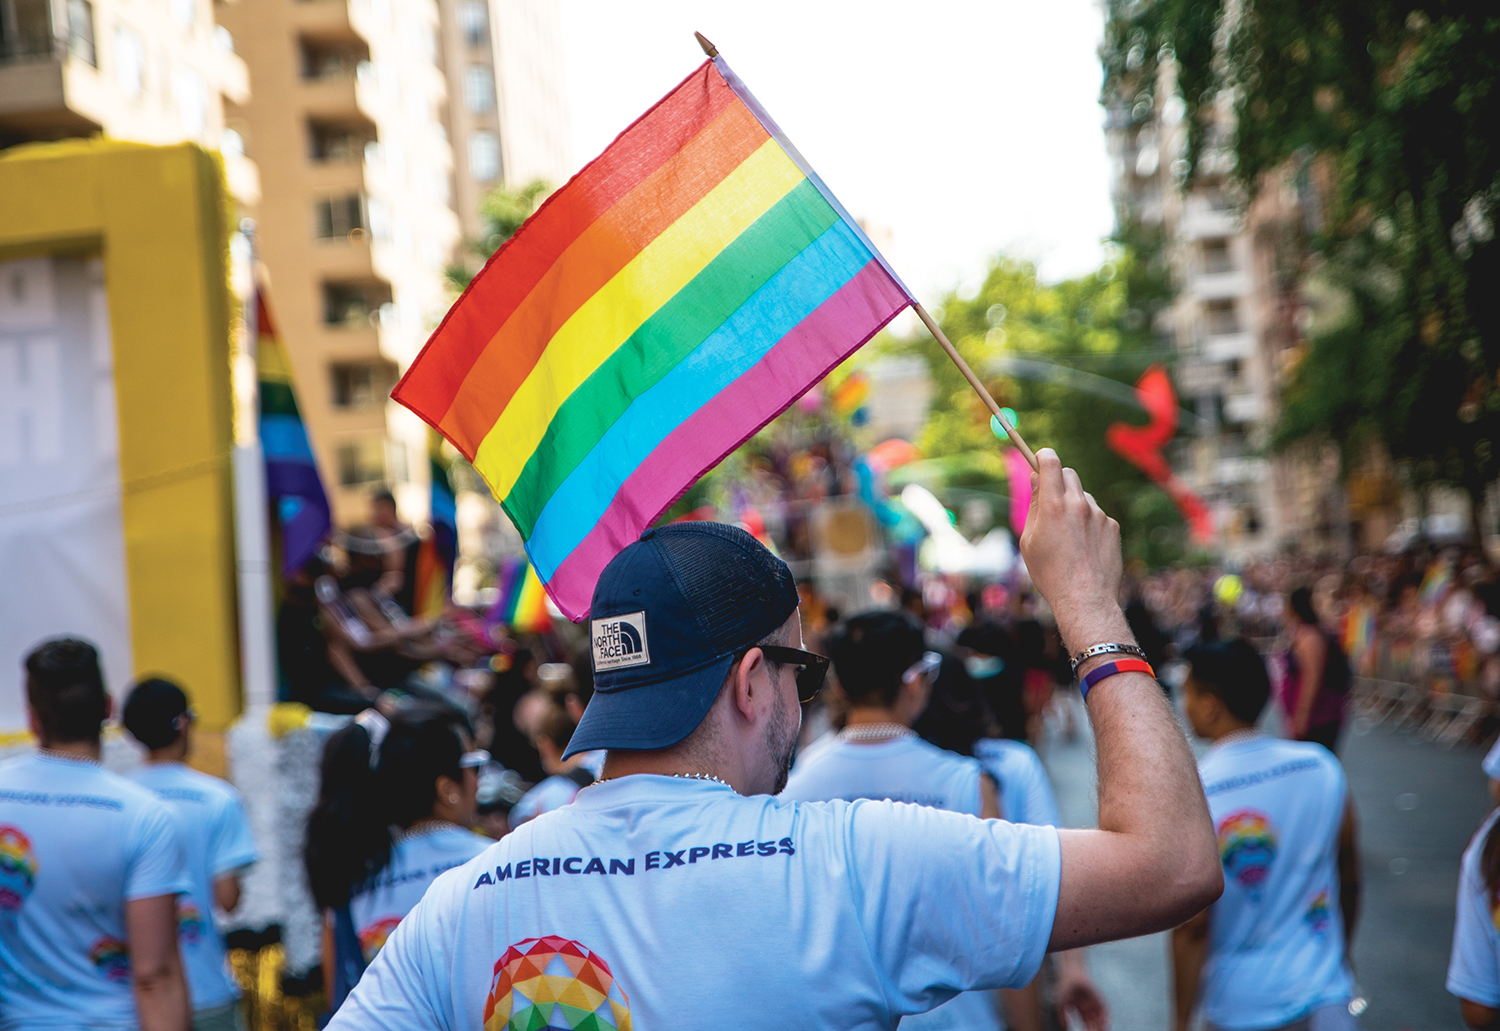 Brands Go Experiential to Connect with the LGBTQ Community